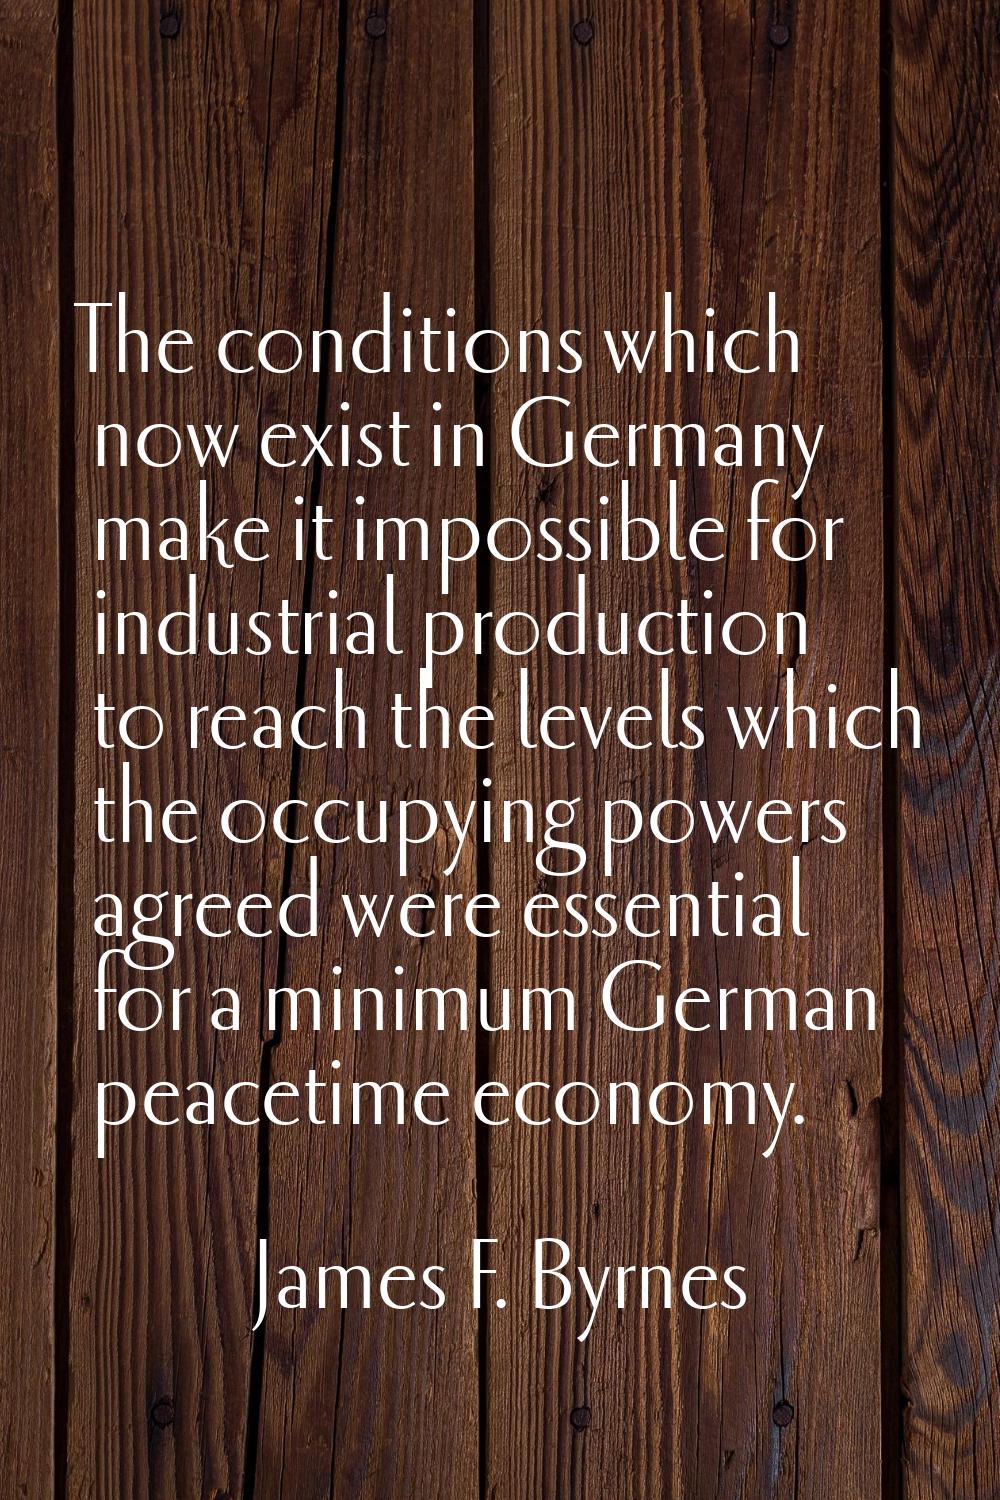 The conditions which now exist in Germany make it impossible for industrial production to reach the